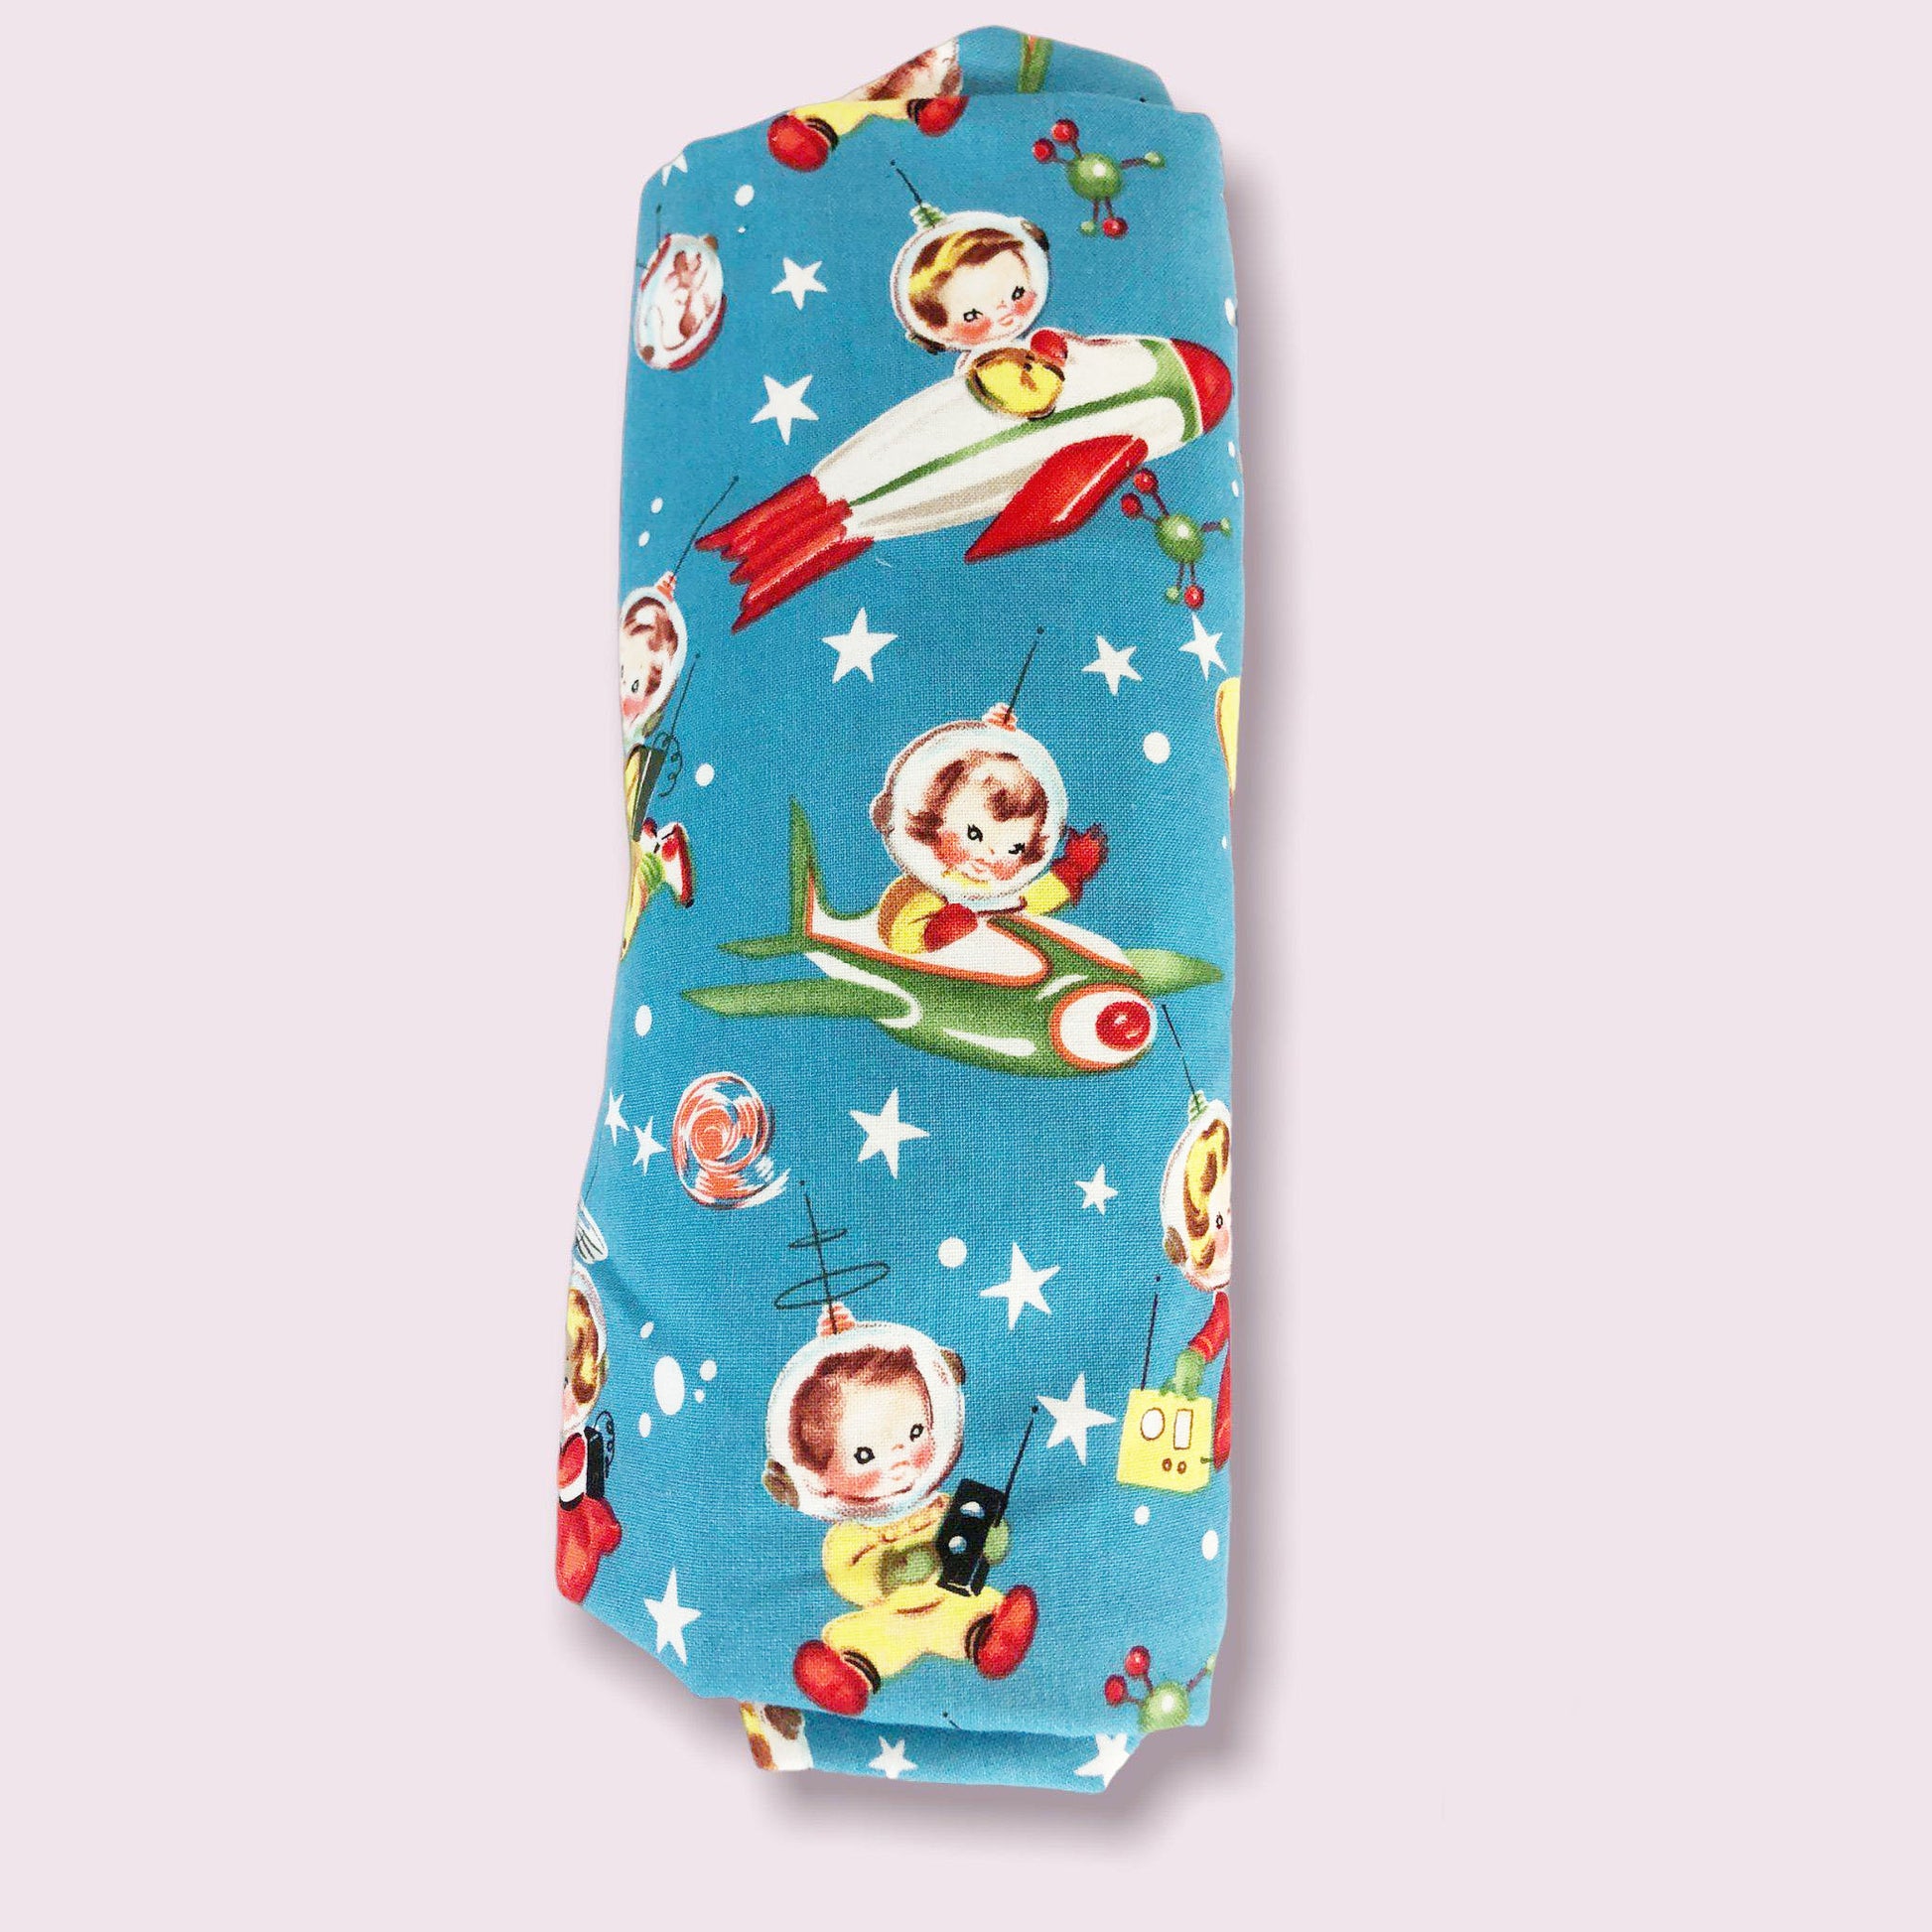 Not Your Typical Changing Pad Covers Or Co-Sleeper Fitted Sheets-Astrokids-